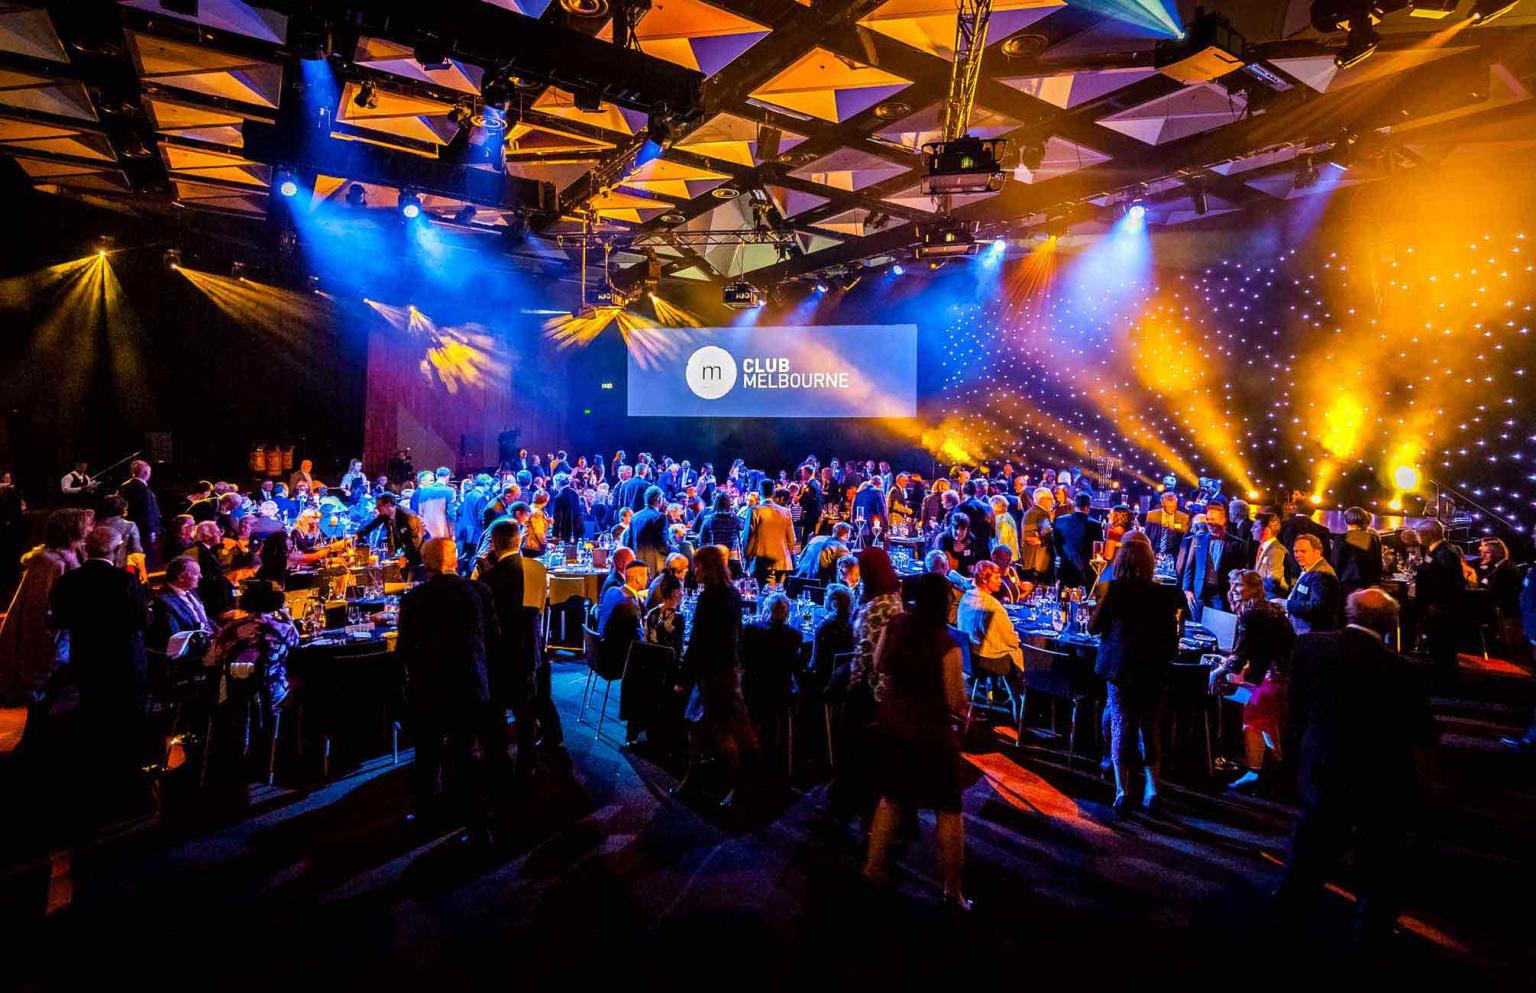 Large crowd seated at a formal gala dinner, with blue and yellow lights over head. In the background a screen displays the Club Melbourne logo. 